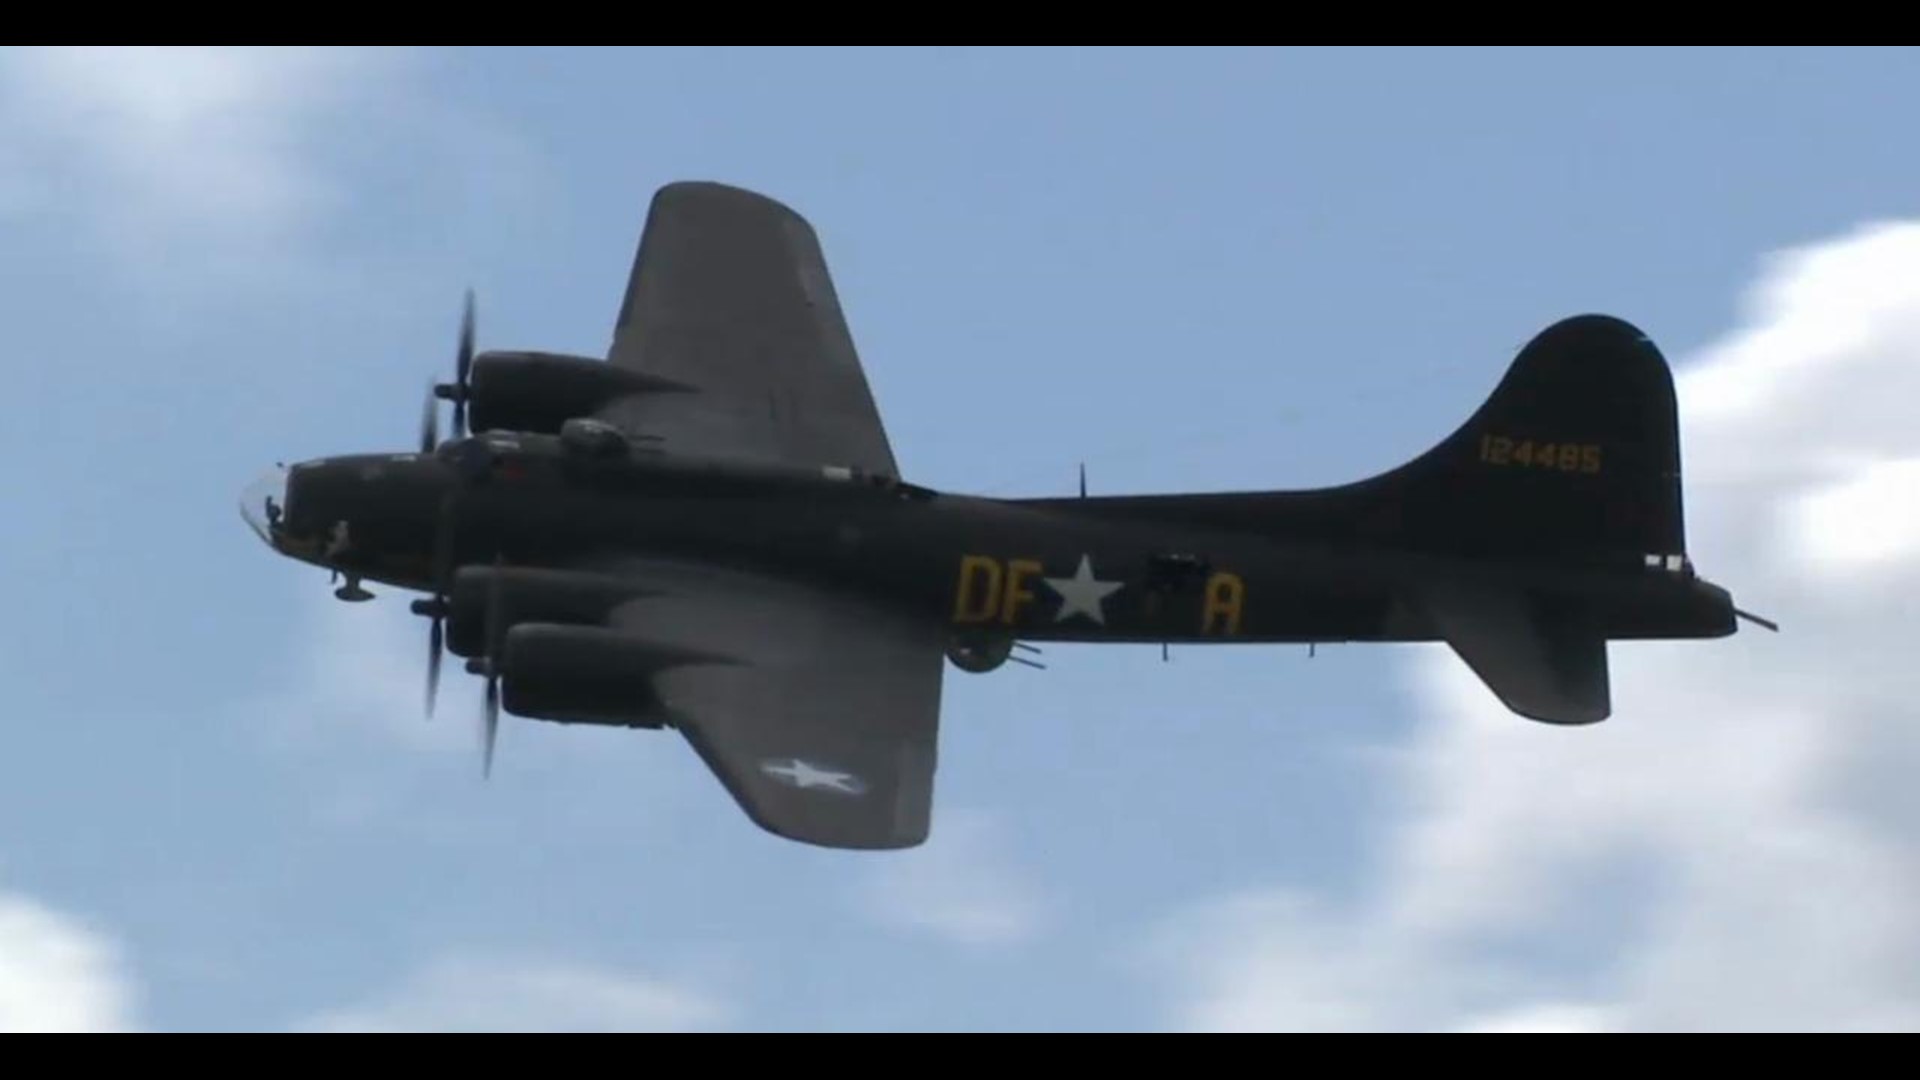 WWII Flyer Gets Another Trip In Classic Plane He Once Served On